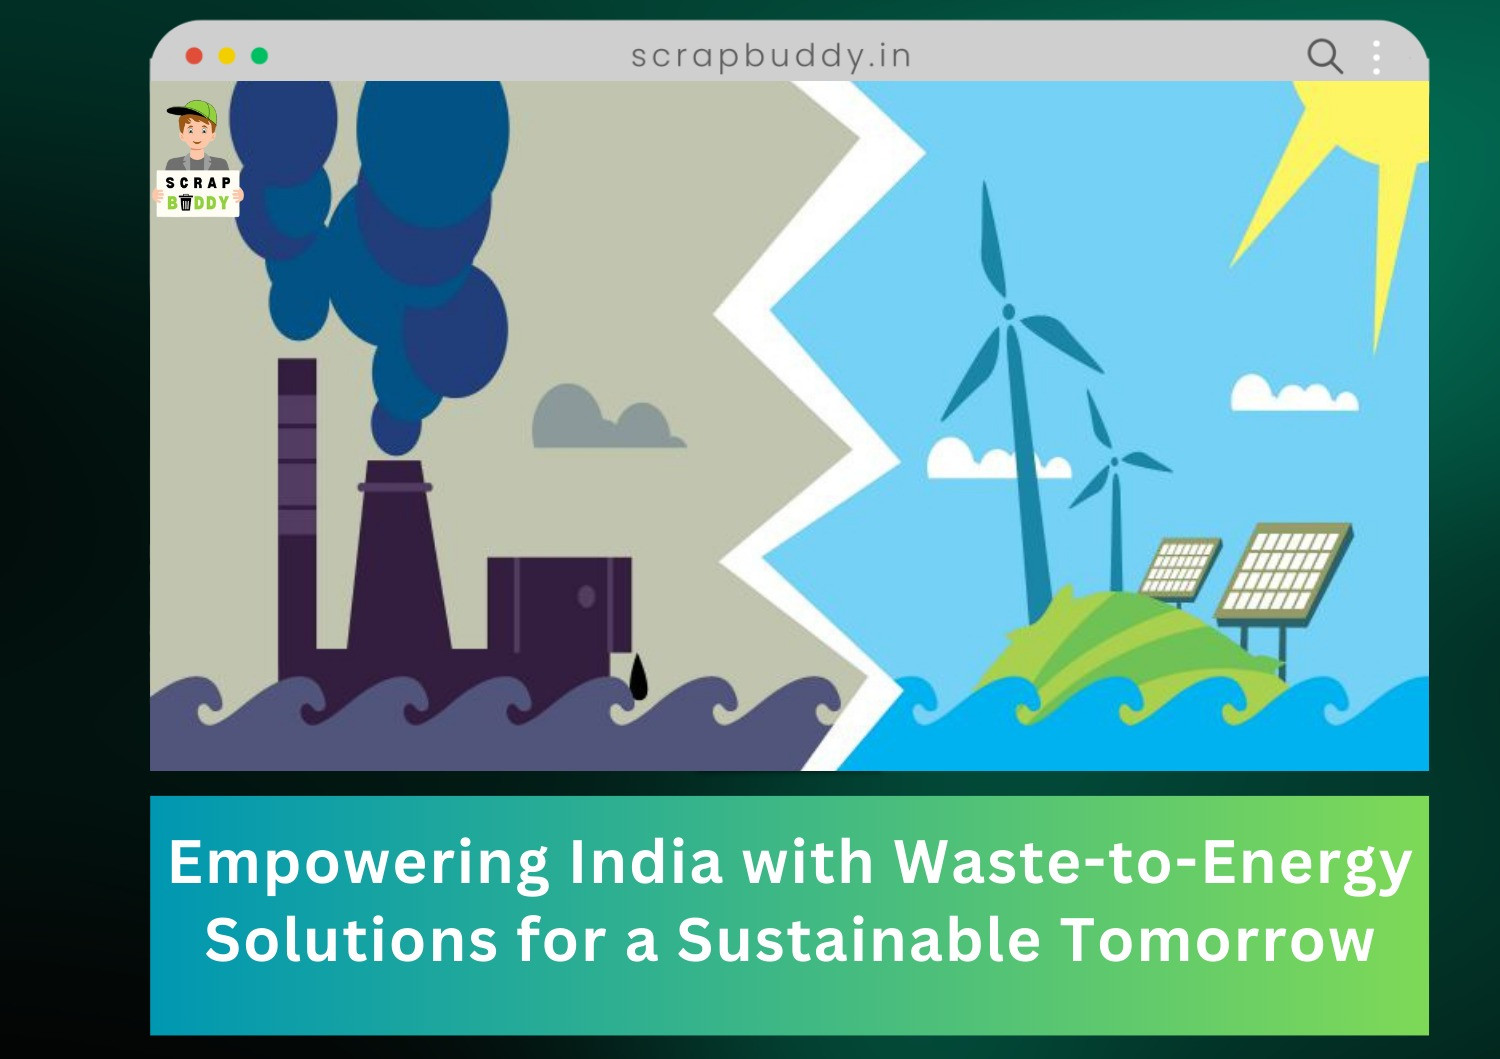 "ScrapBuddy: Empowering India with Waste-to-Energy Solutions for a Sustainable Tomorrow"